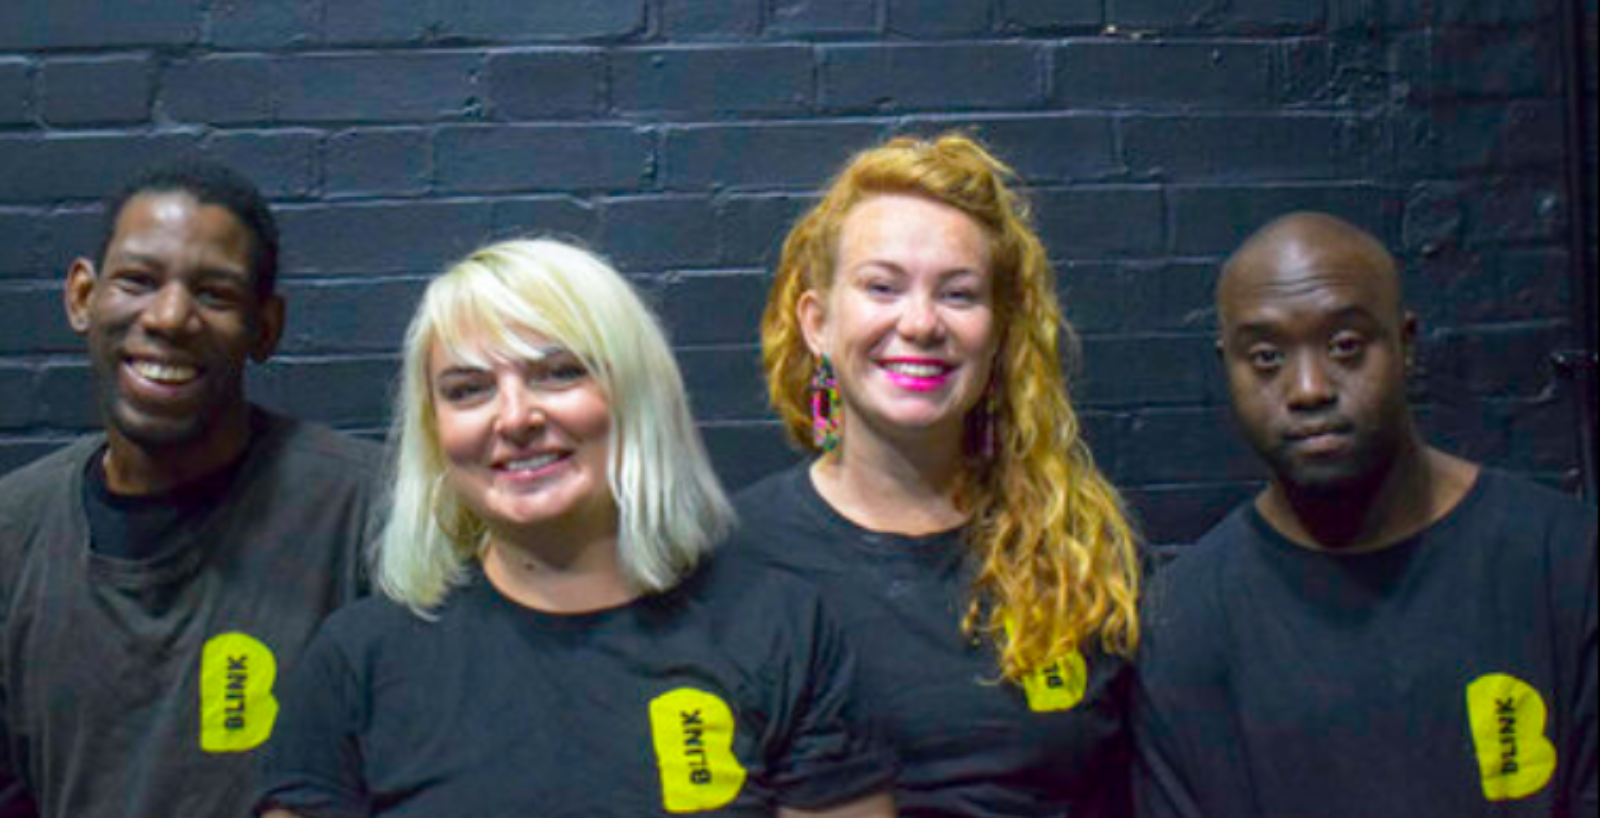 4 members of blink Dance theatre looking at the camera, stood in front of a black wall, wearing black T-shirts with the company logo on.